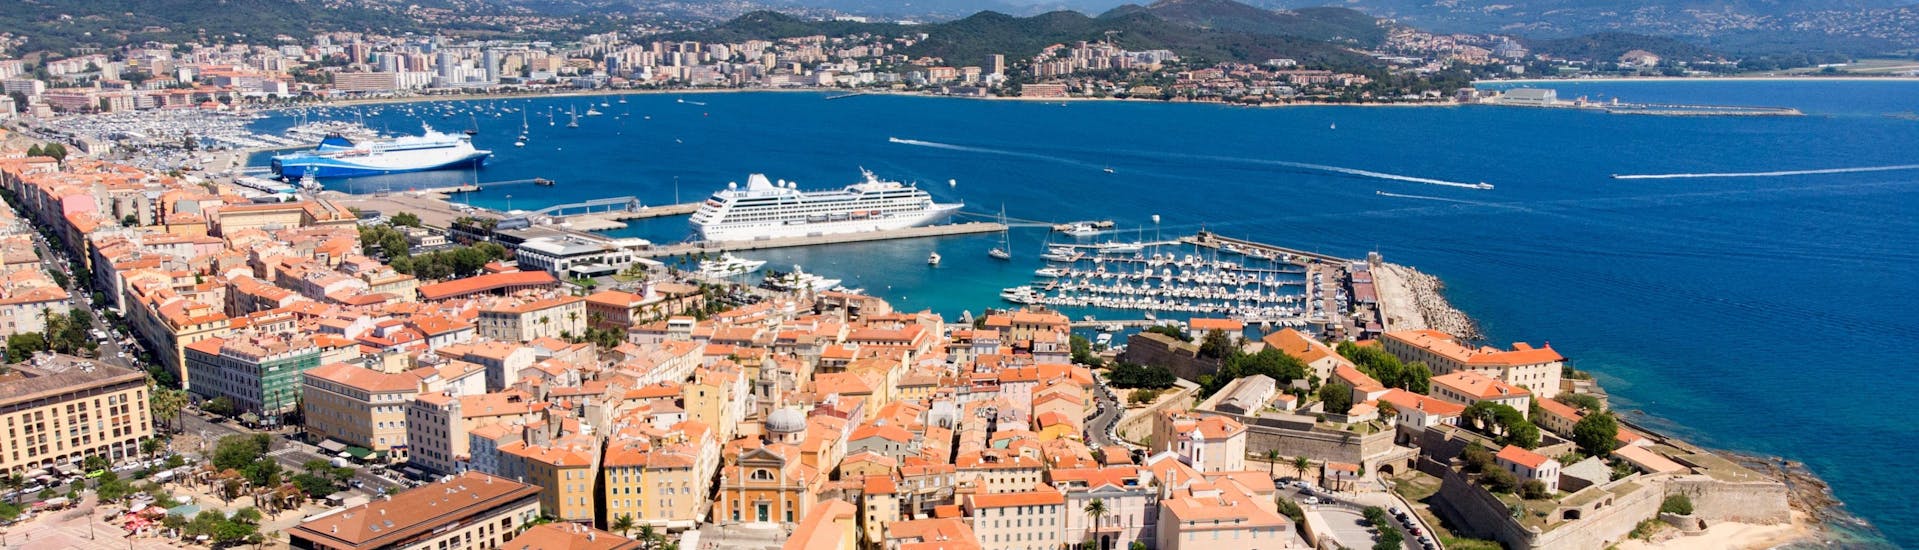 The port and the bay of Ajaccio, where many boat trips around the island of Corsica are starting.